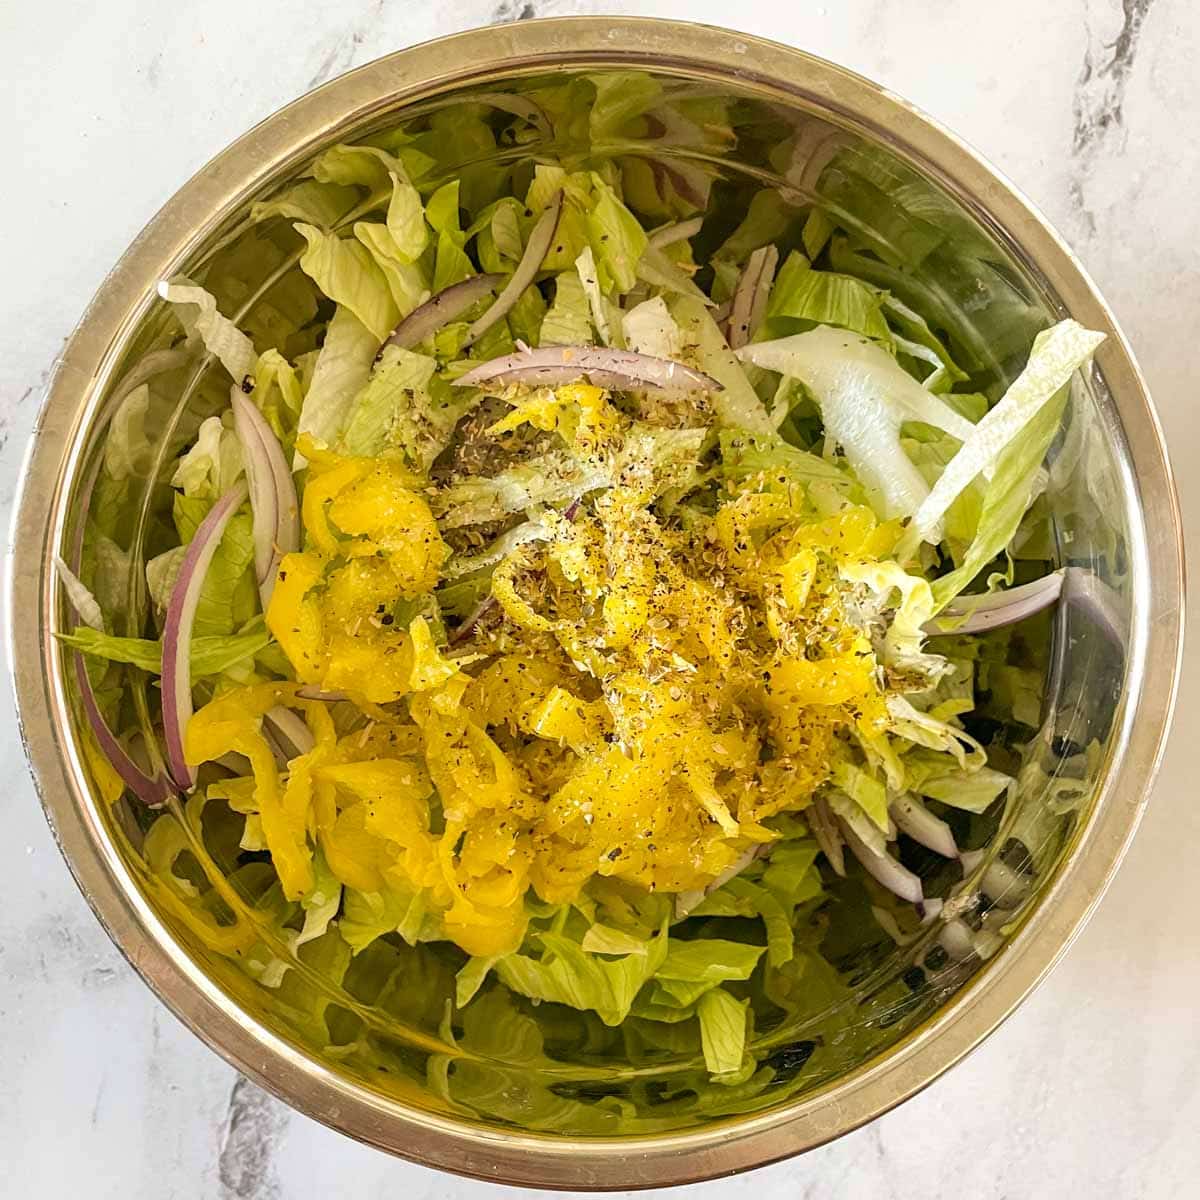 Lettuce, onion, pepperoncini, salt, pepper, garlic, red wine vinegar and olive oil is mixed in a bowl.